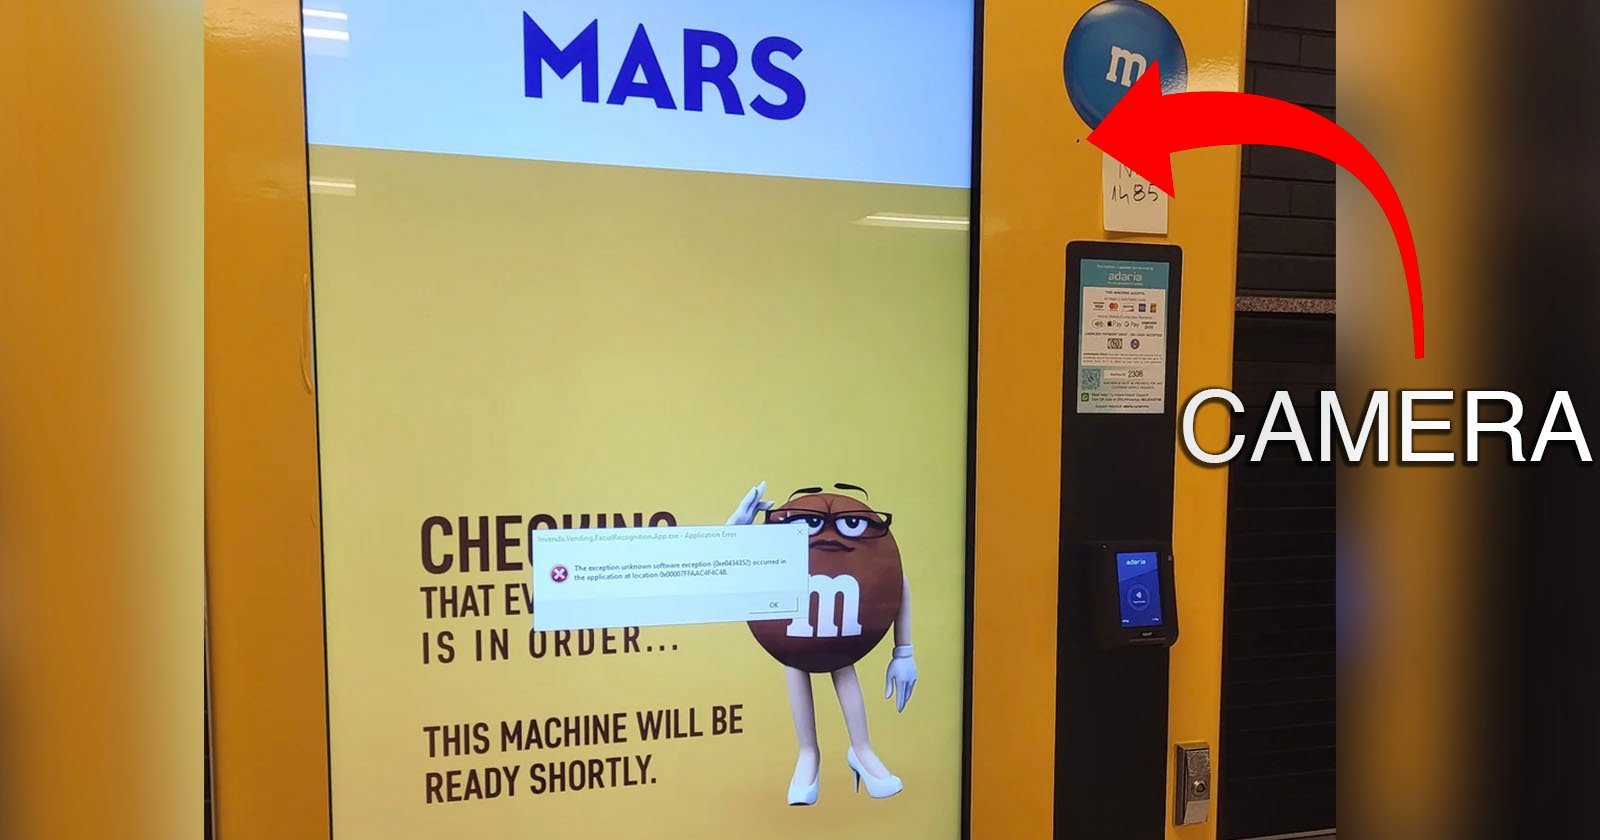 Students Discover M&M's Vending Machine is Spying on Them